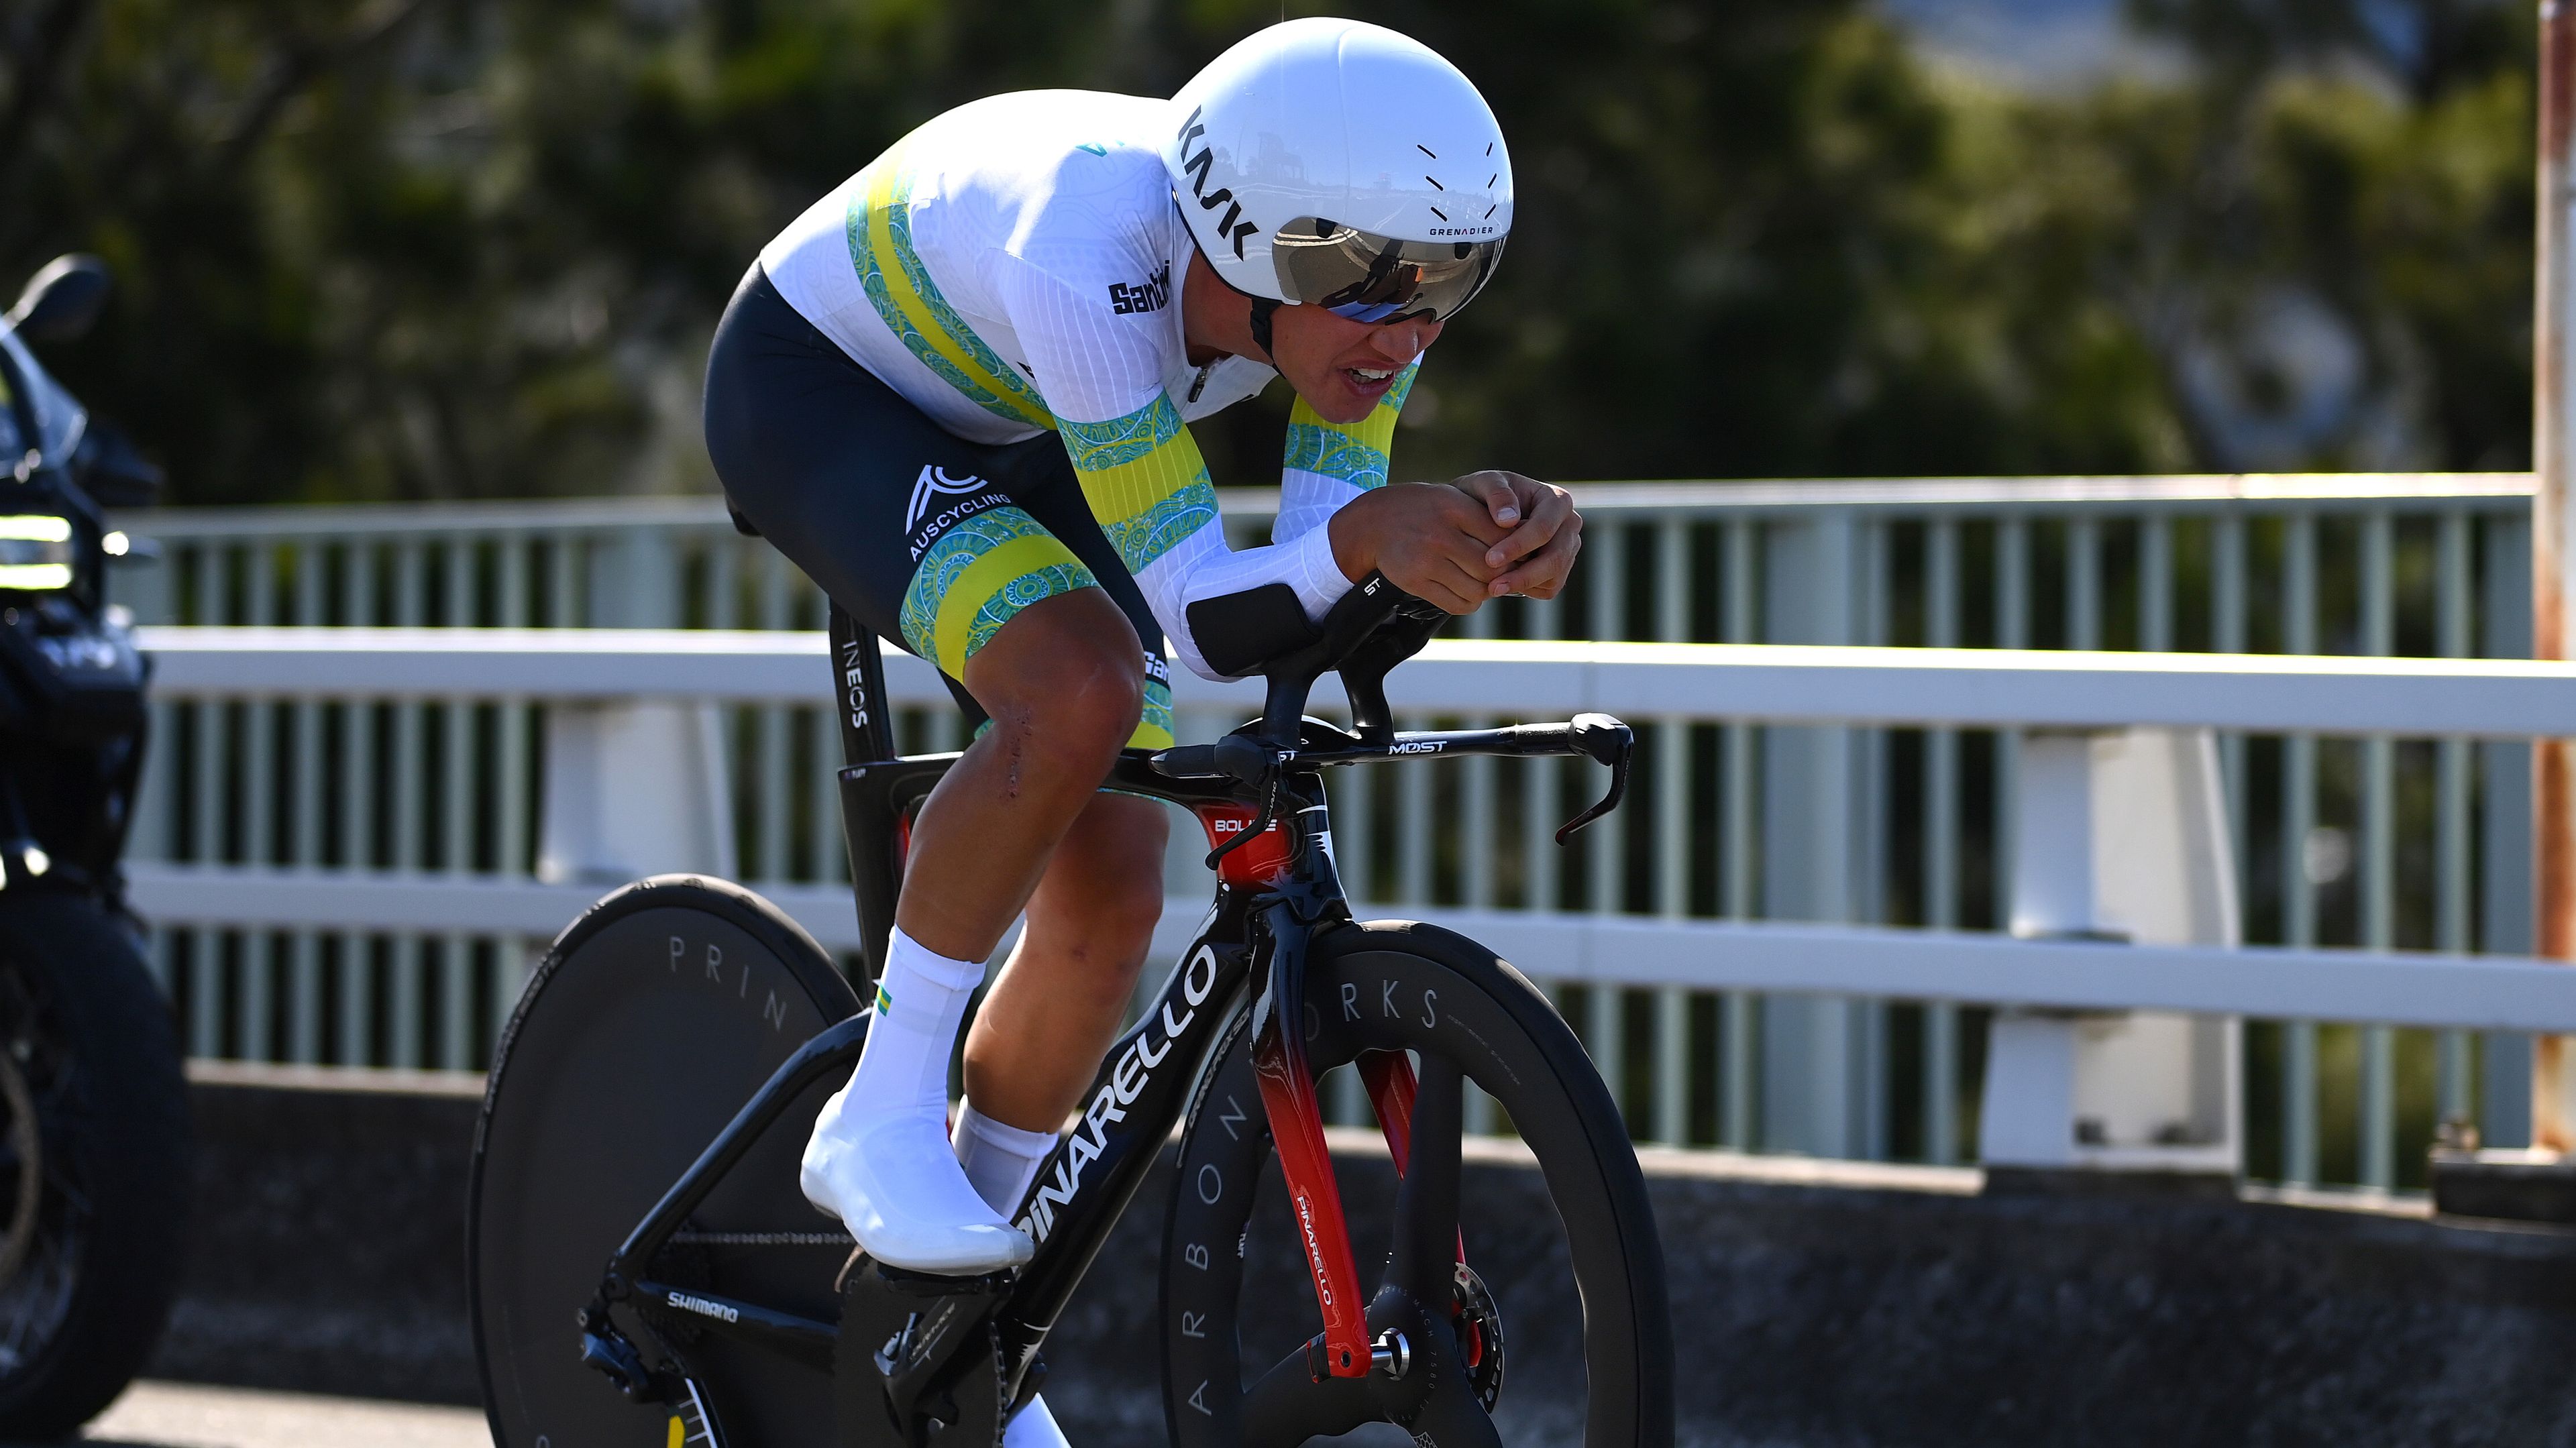 Lucas Plapp of Australia sprints during the 95th UCI Road World Championships 2022 - Men Individual Time Trial a 34,2km individual time trial race from Wollongong to Wollongong / #Wollongong2022 / on September 18, 2022 in Wollongong, Australia. (Photo by Tim de Waele/Getty Images)